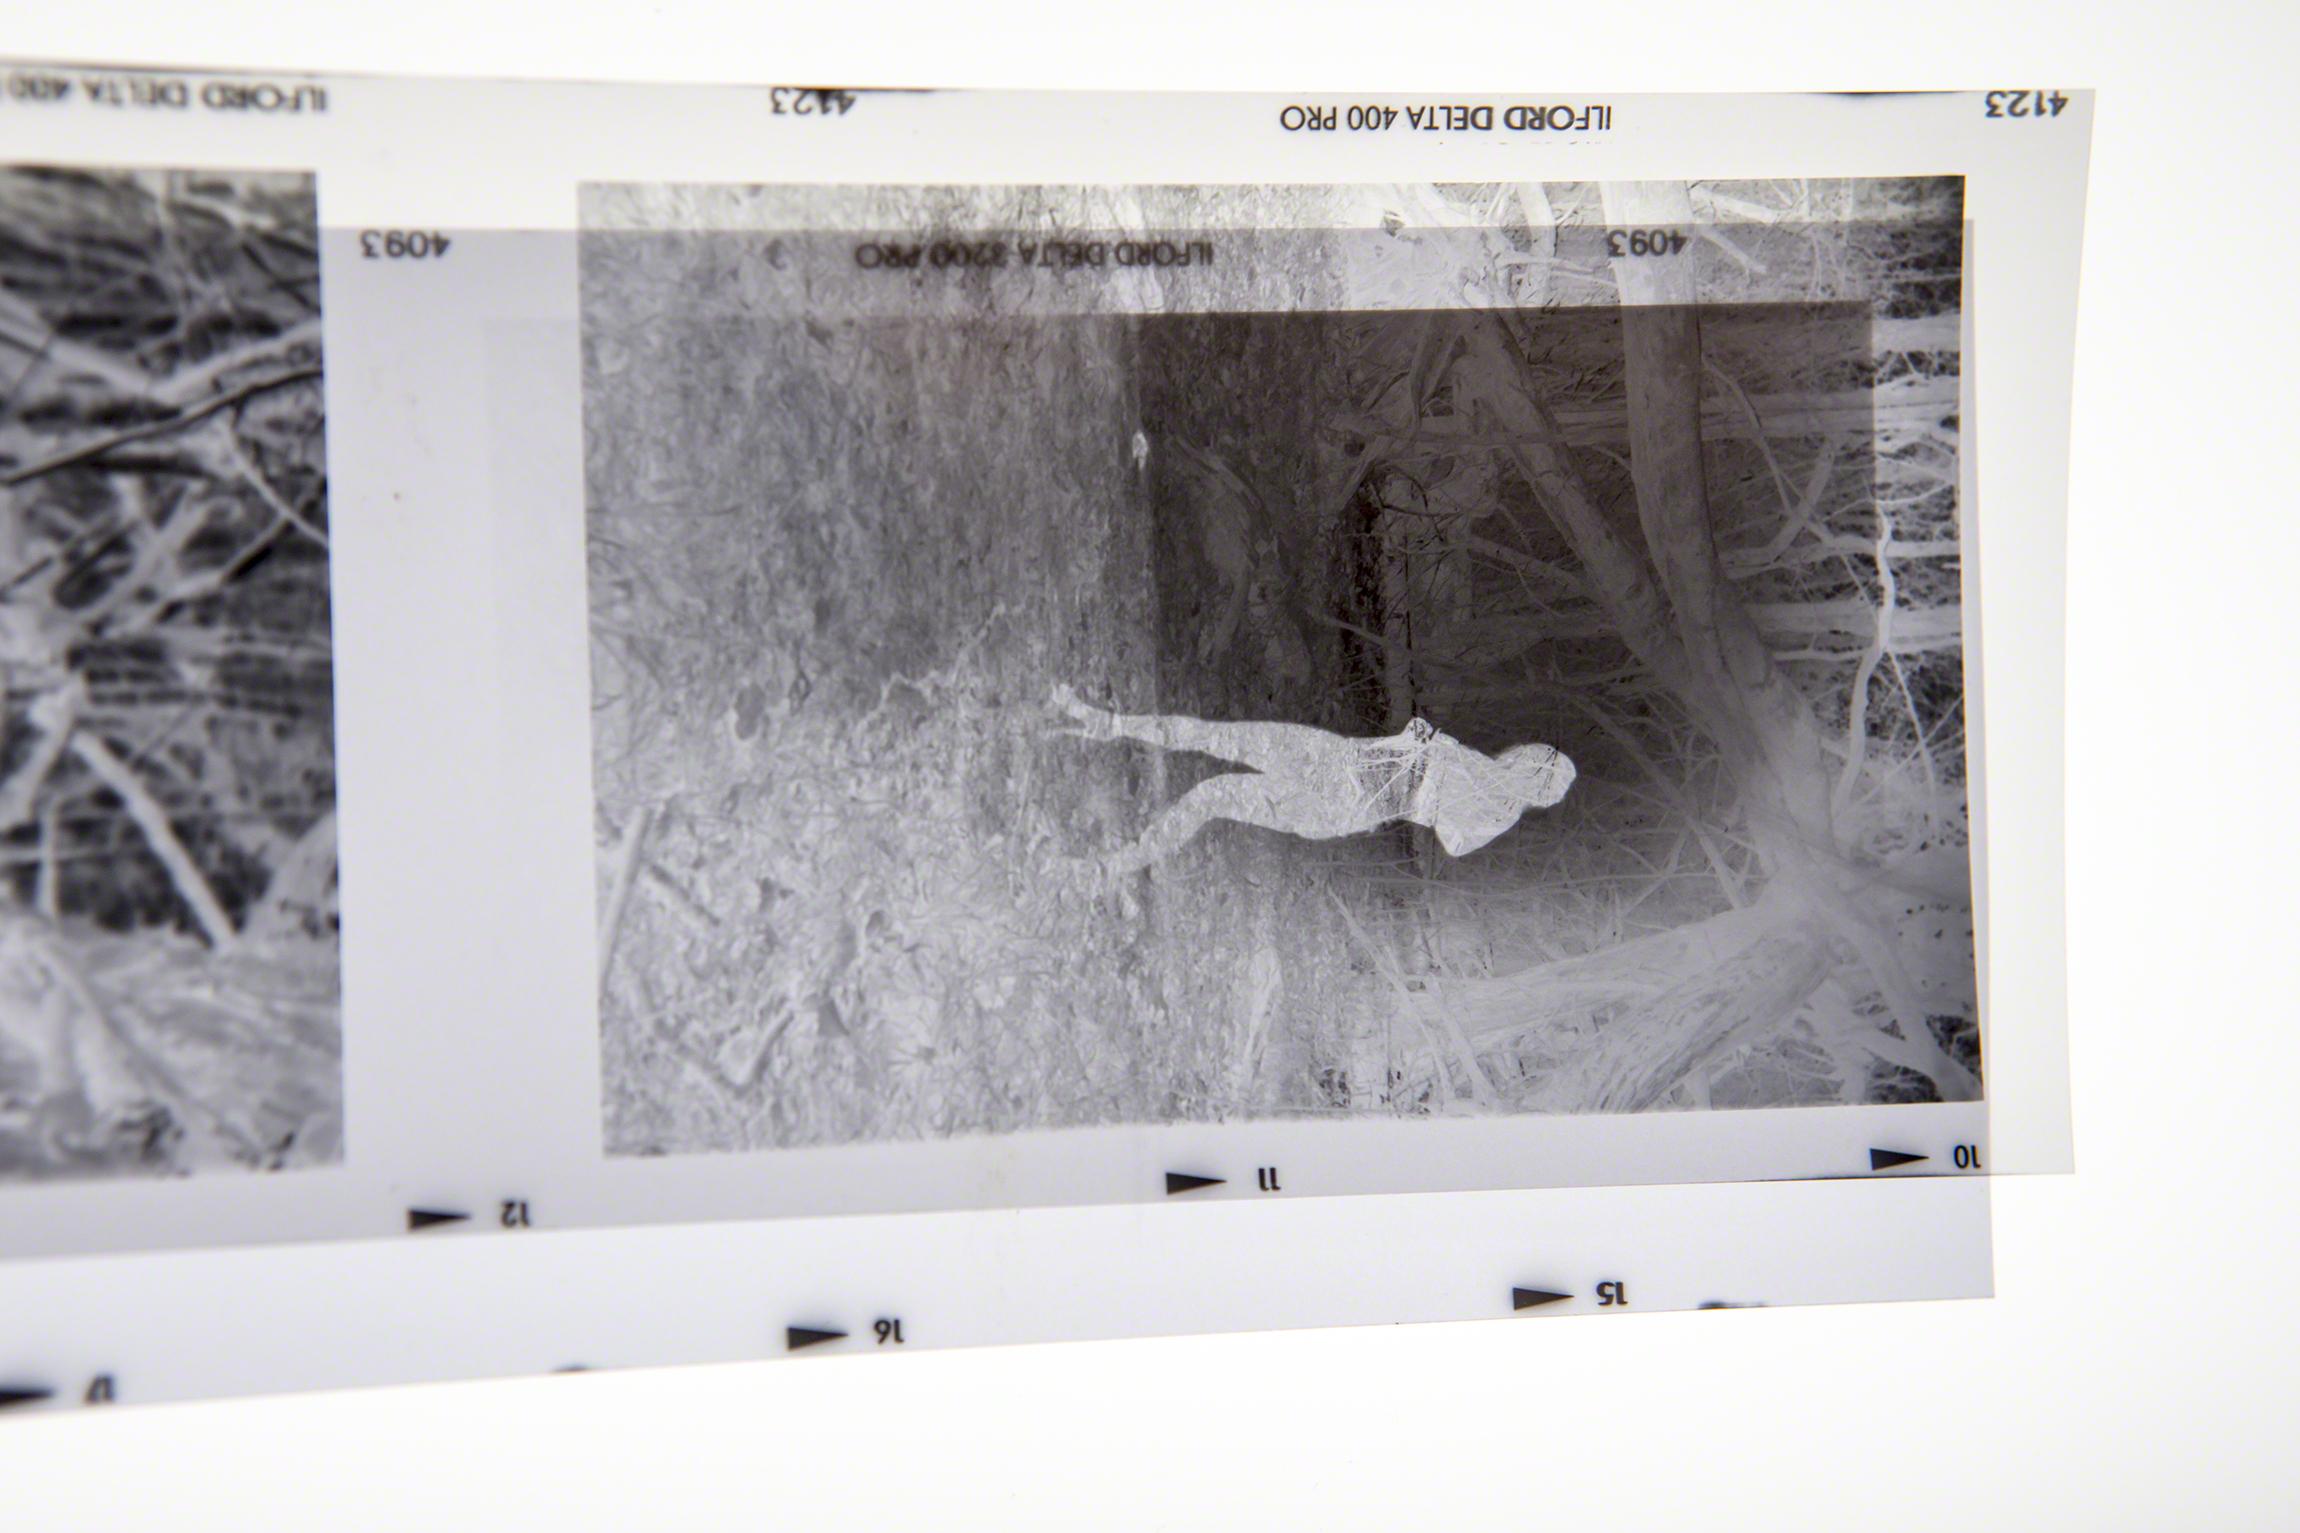  A quick look at the negatives on the lightbox to see if they will work together for a print 